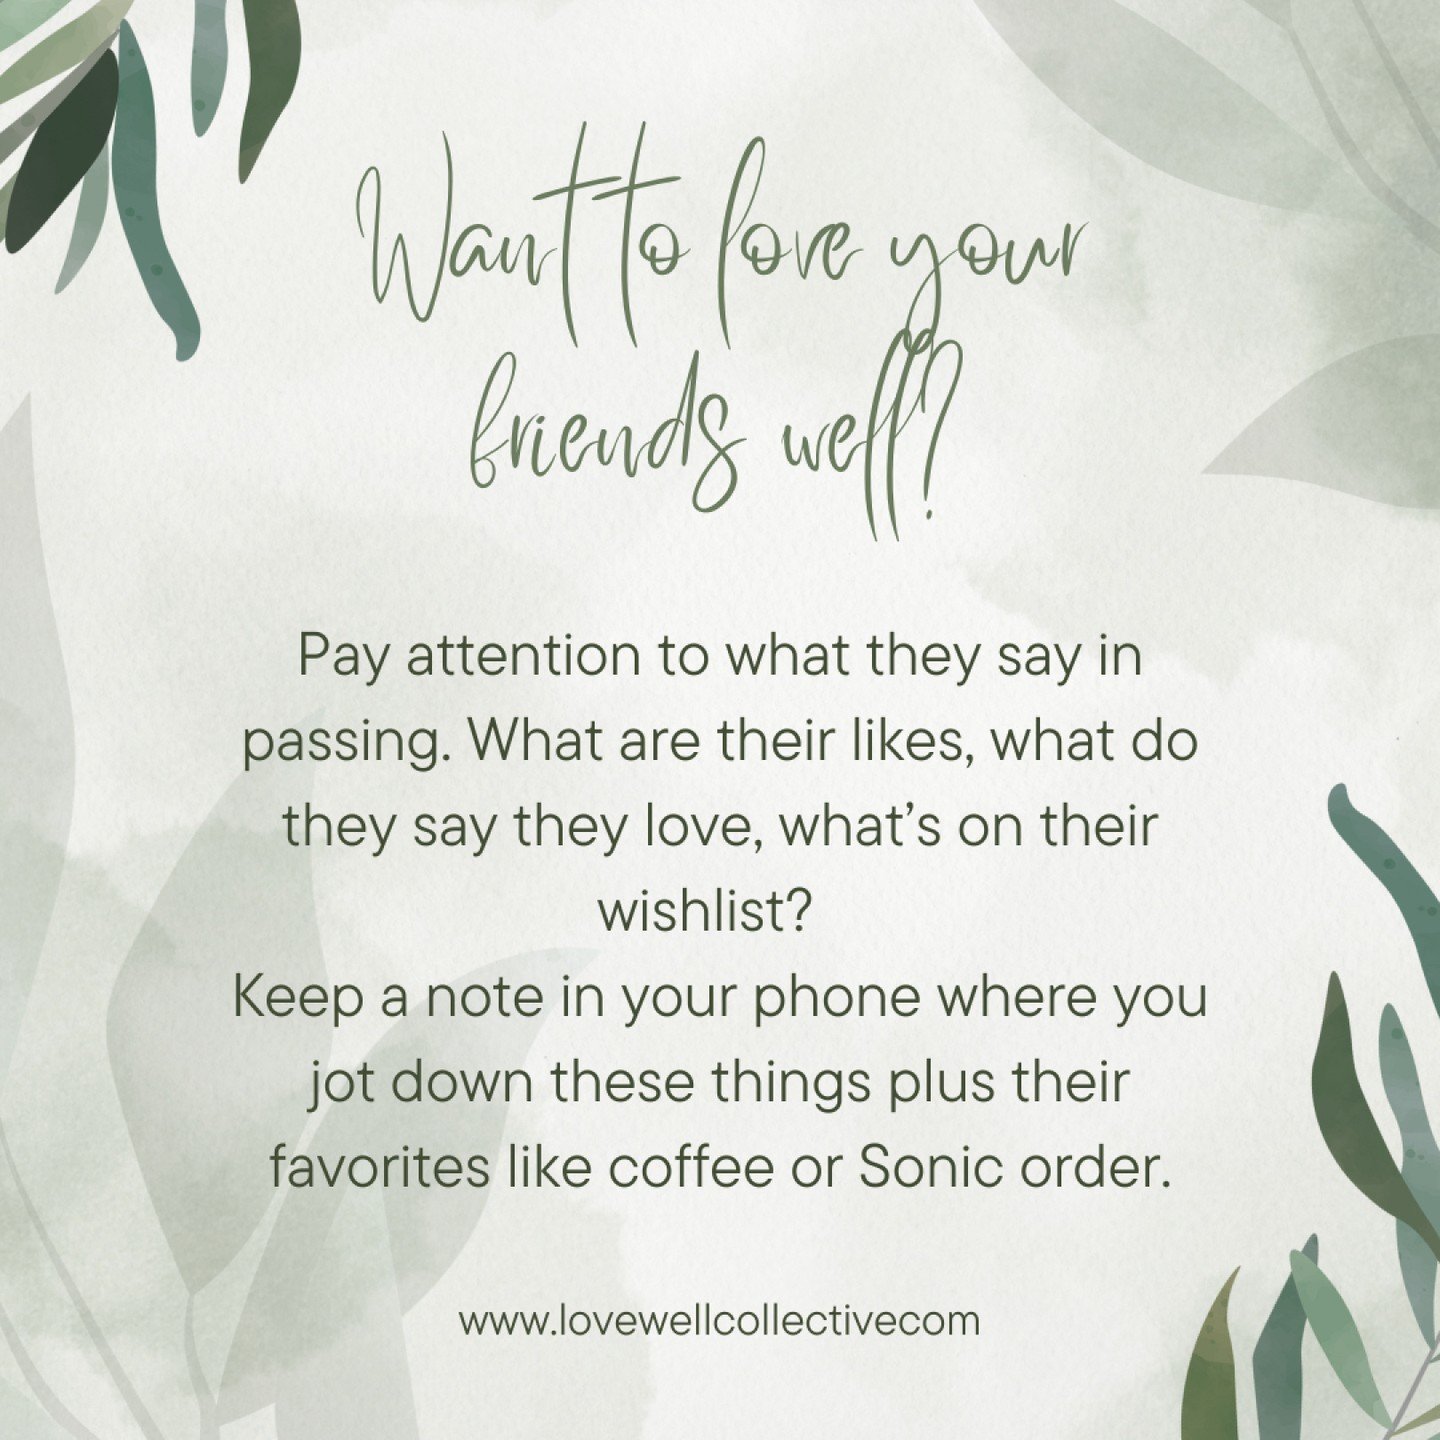 🌻The key to good friendships is being INTENTIONAL... Paying attention to what your friends say about things they like provide you with great ideas in the future when you want to give a thoughtful gift or surprise them with their favorite coffee! 

?